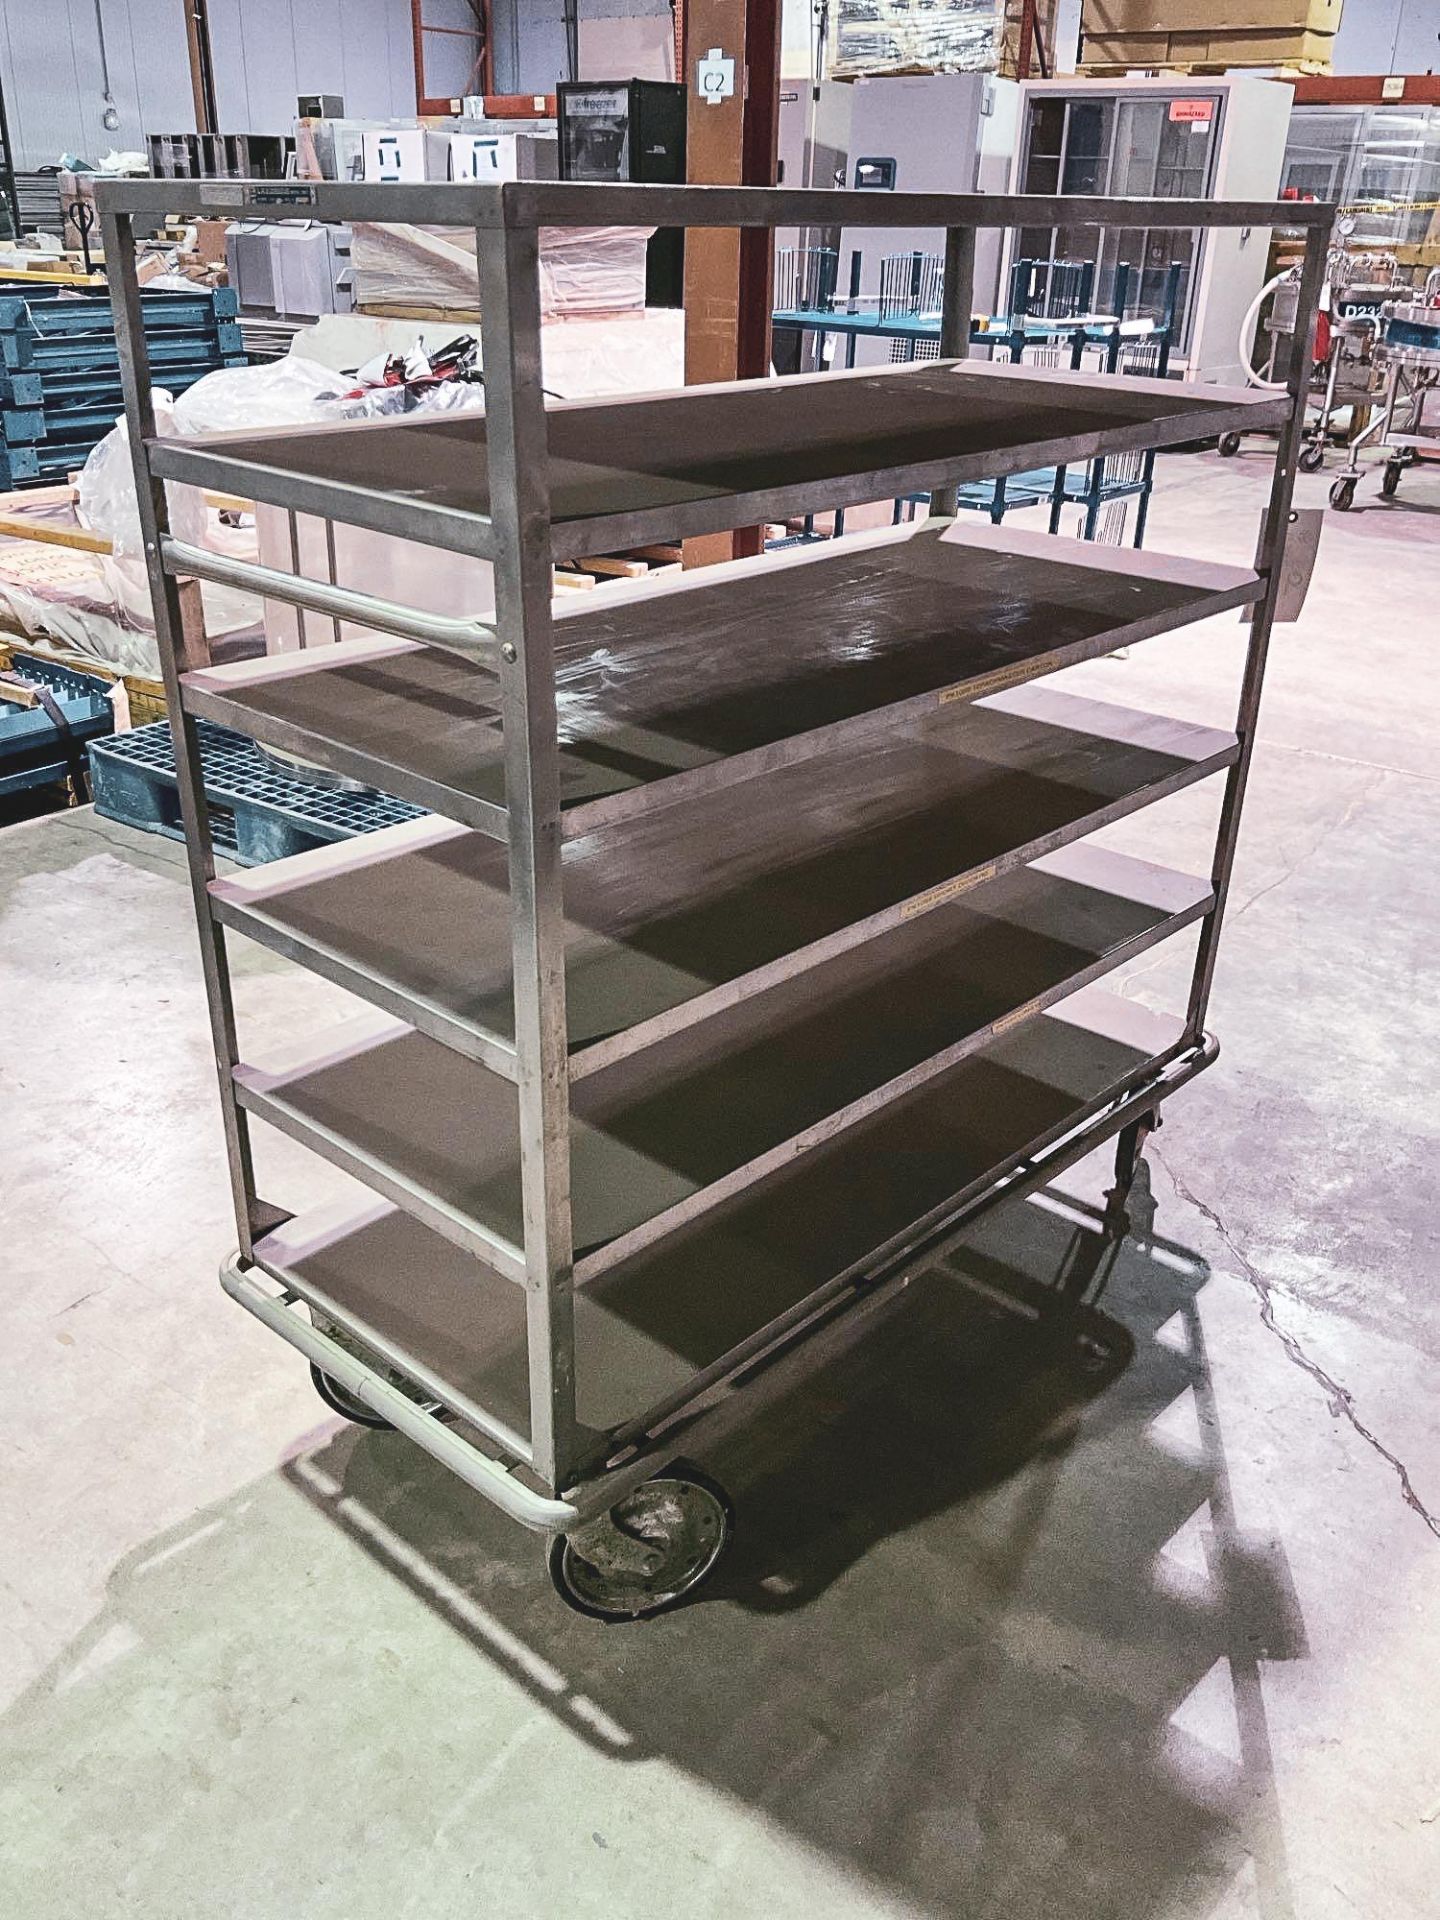 SIX SHELF STAINLESS STEEL ROLLER CART - Image 4 of 6